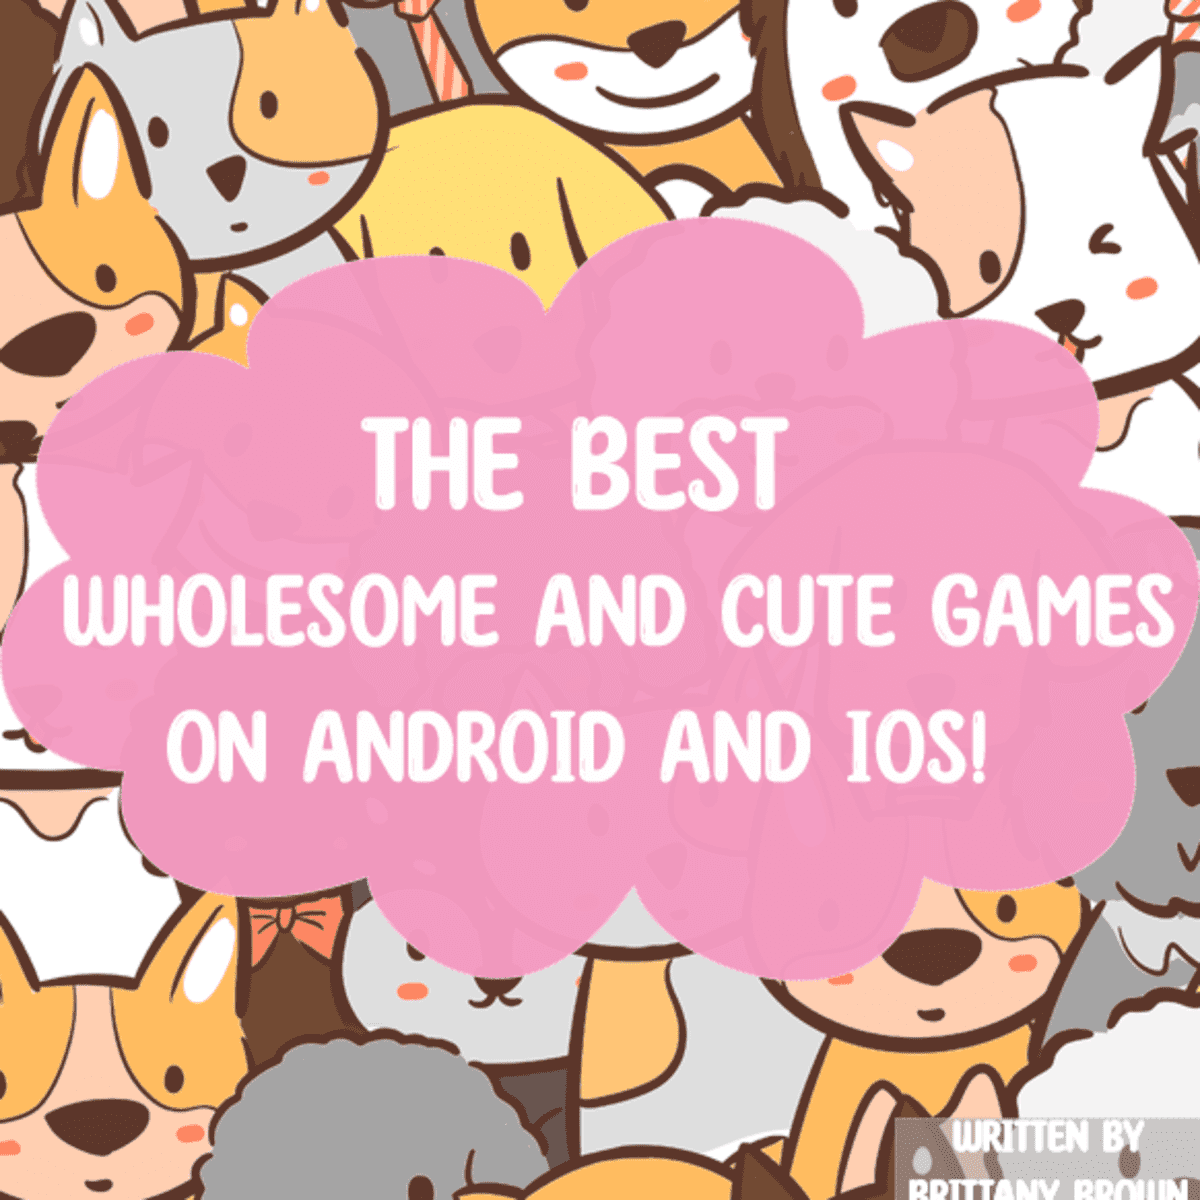 The Best Wholesome and Cute Games for Android and iOS! - LevelSkip